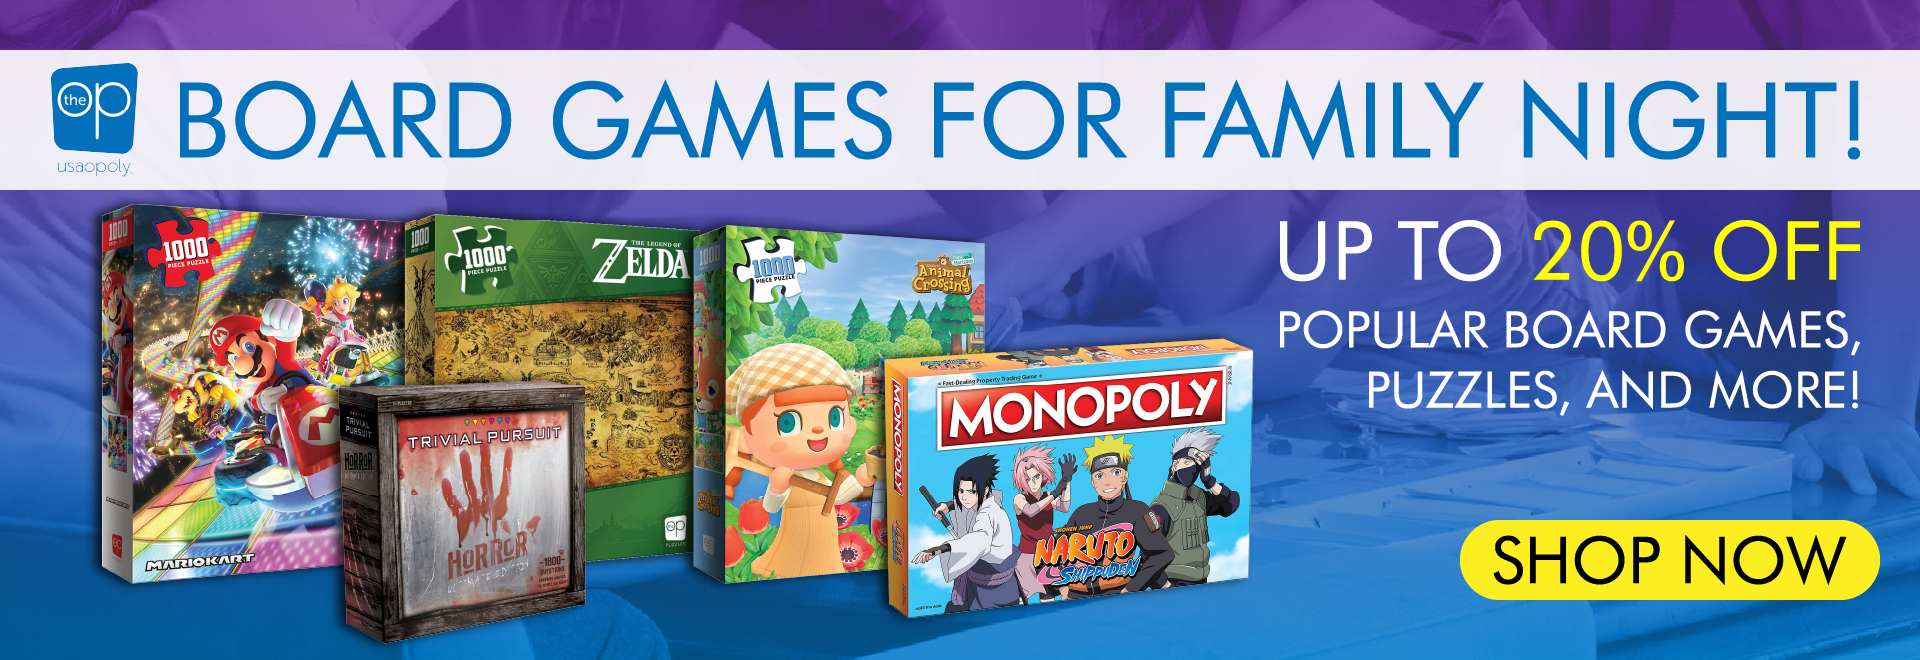 USAopoly - Board Games for Family Night!